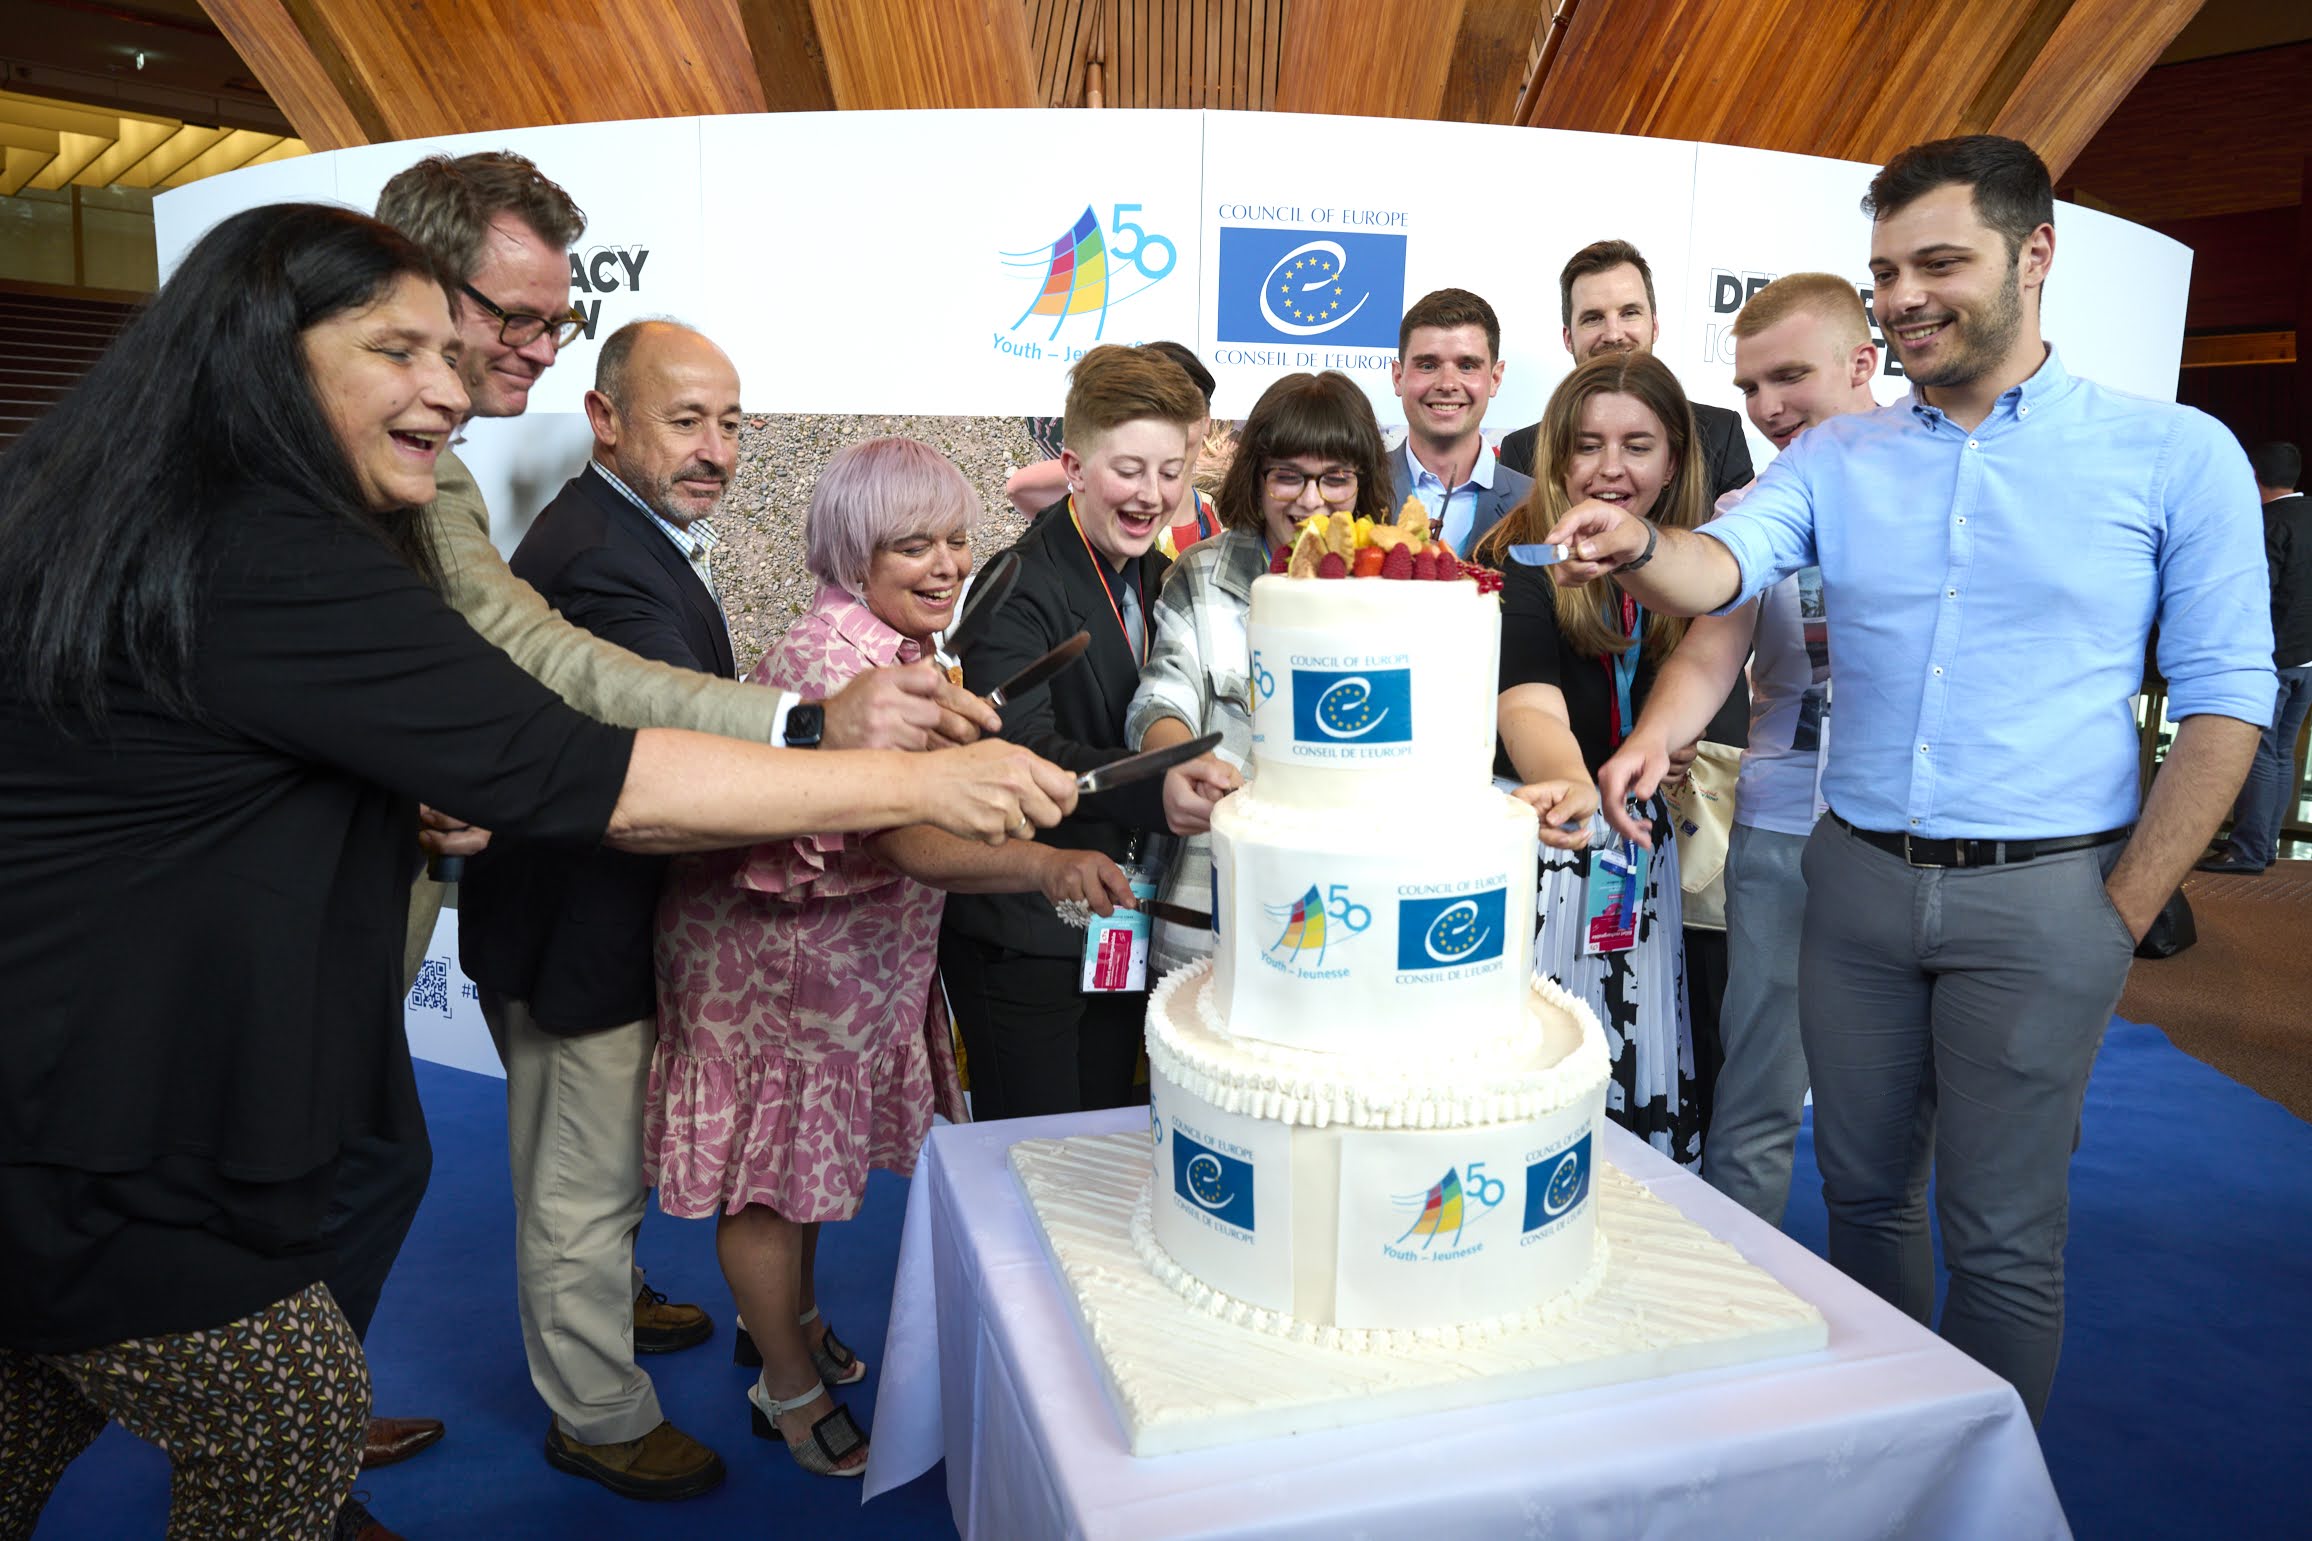 Happy 50th Birthday to the Council of Europe youth sector – full of energy!